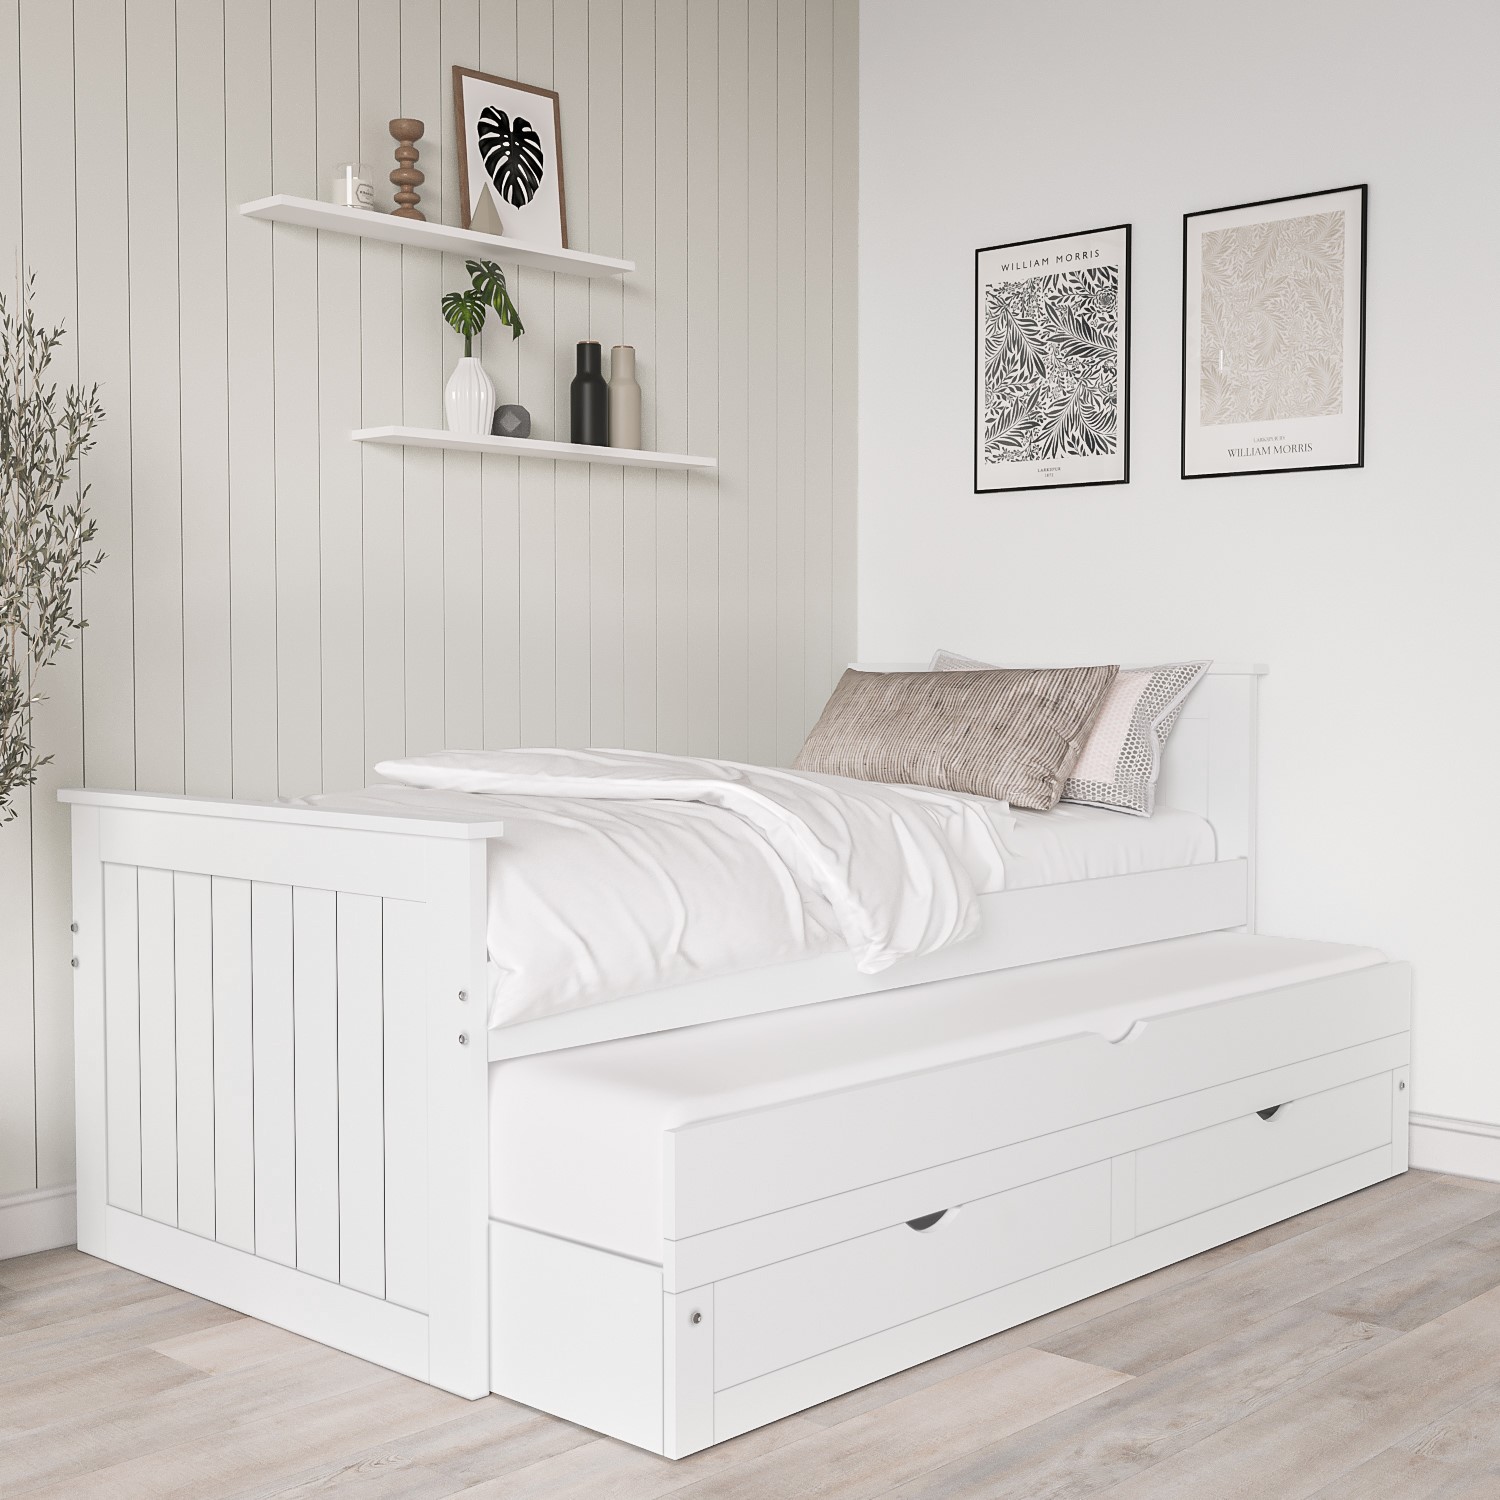 Photo of Single white wooden trundle bed with storage - sander